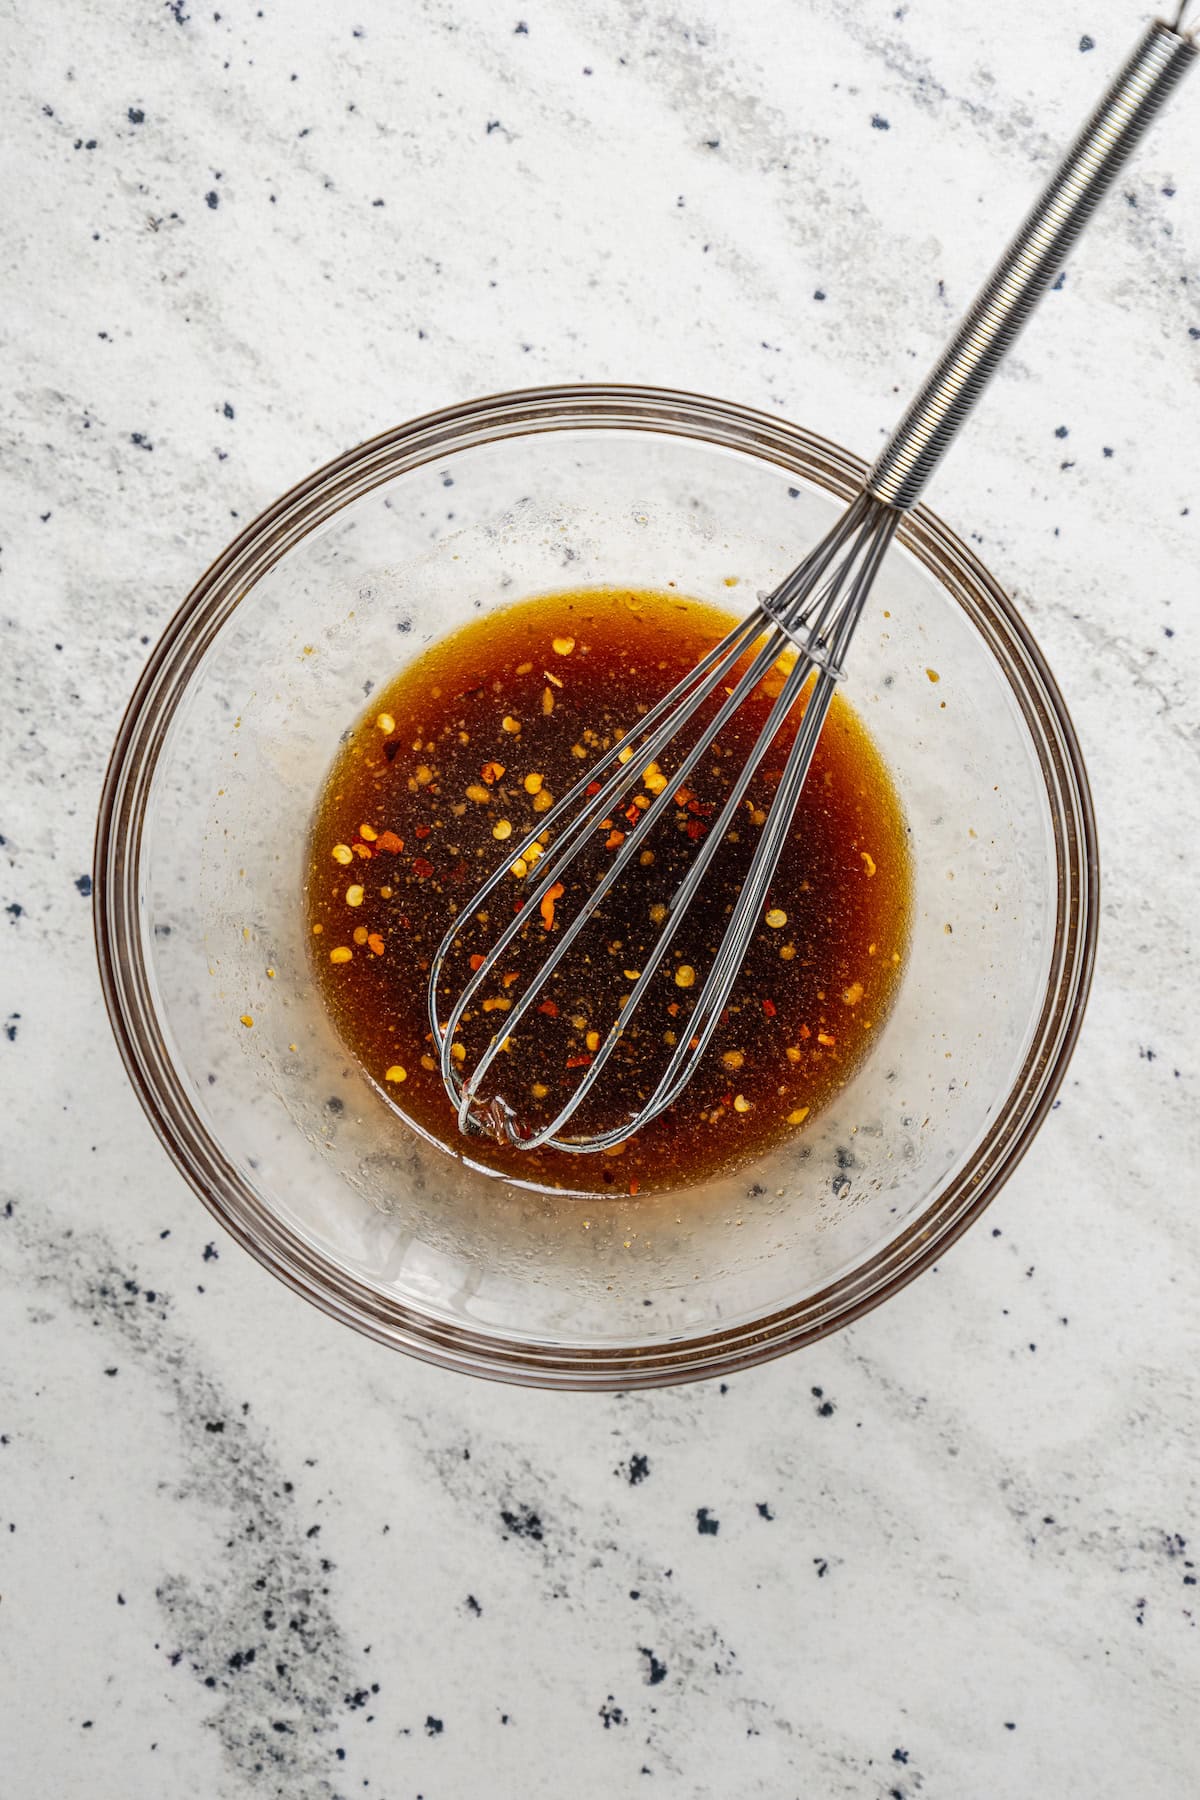 Seasoning sauce in a glass bowl with a whisk.